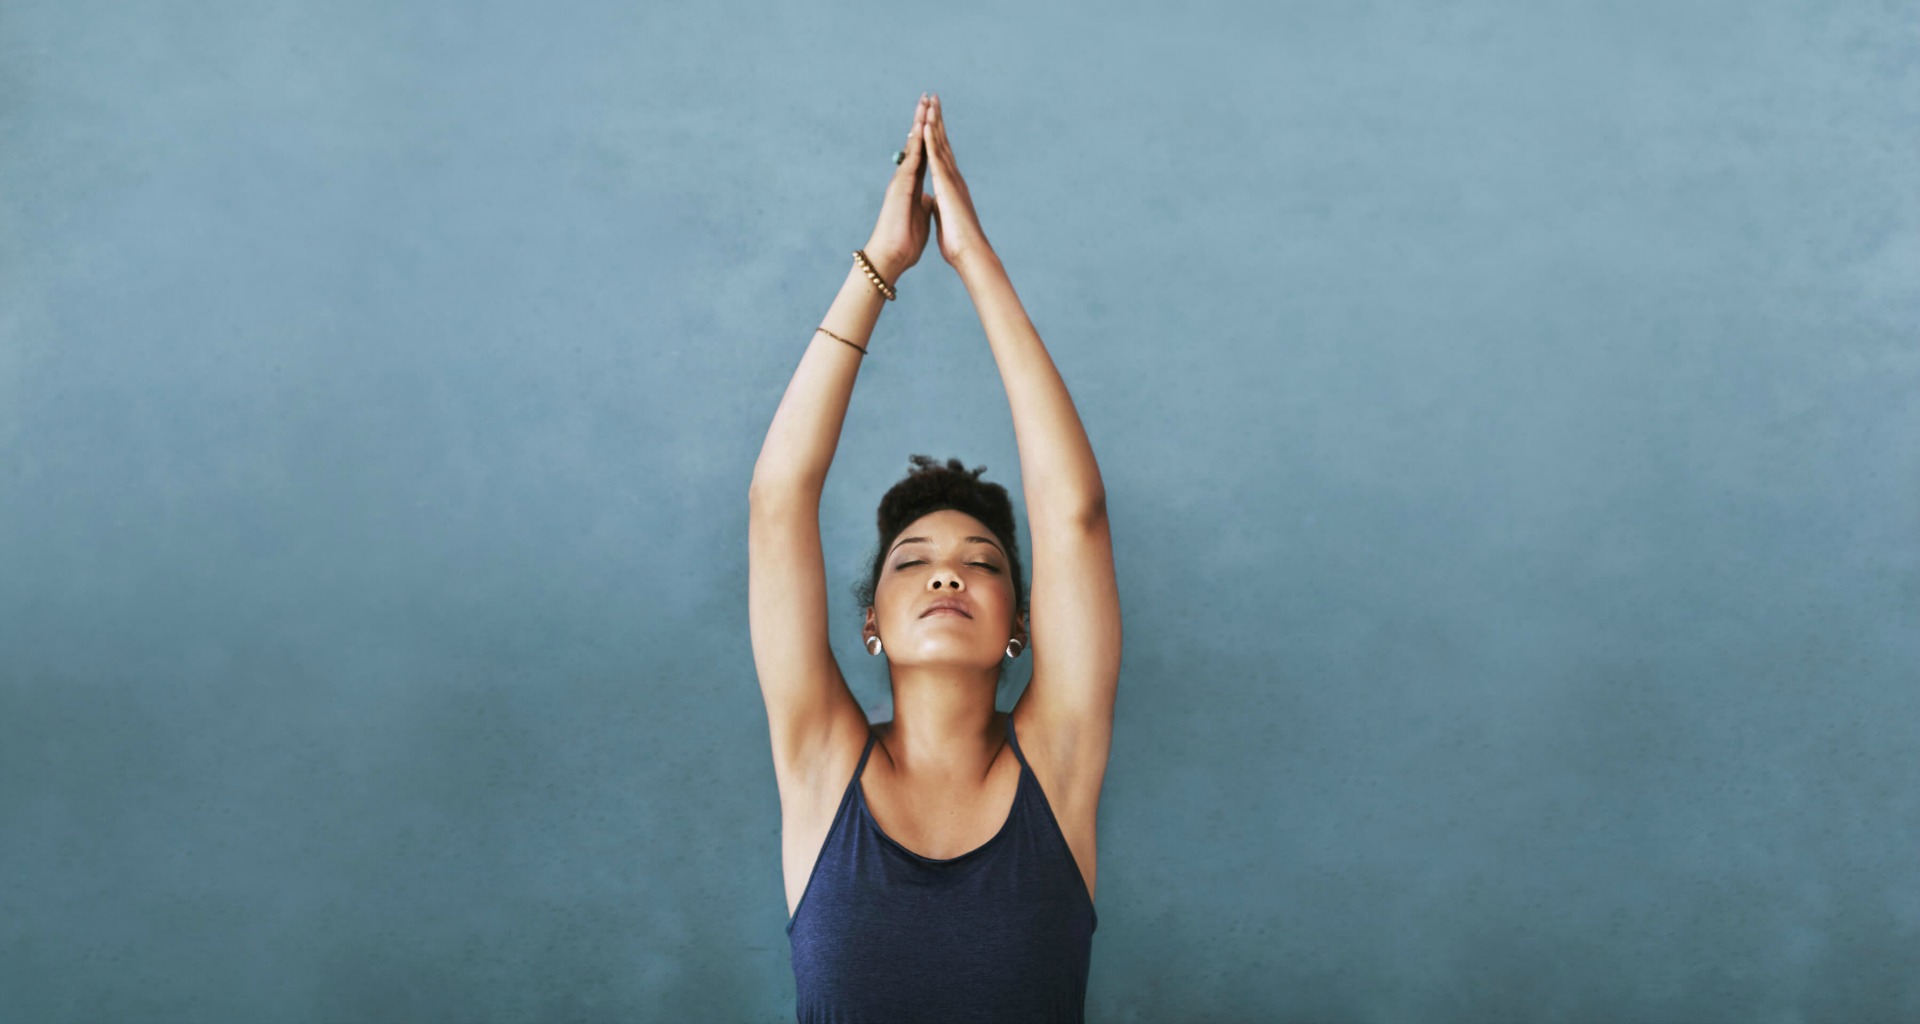 woman stretching hands overhead in yoga pose